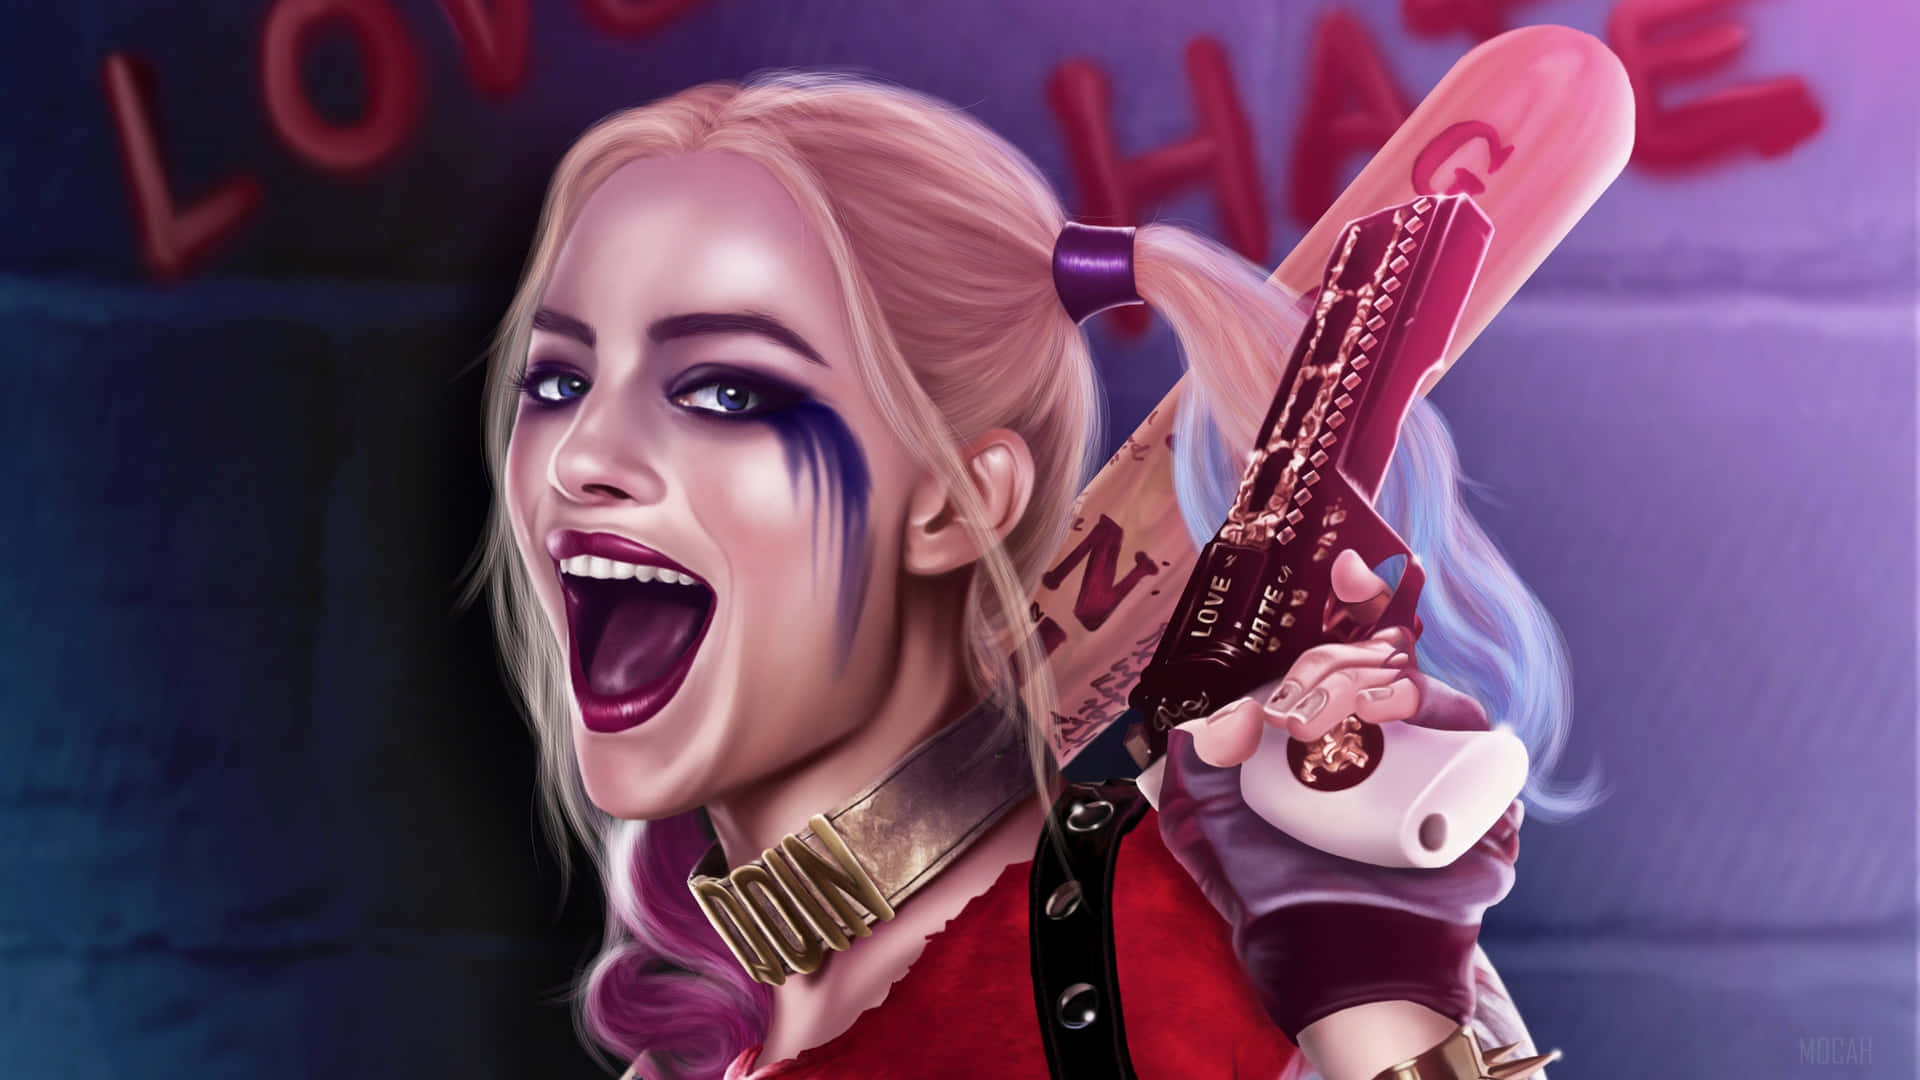 The Unconventional Love Of Joker And Harley Quinn Wallpaper